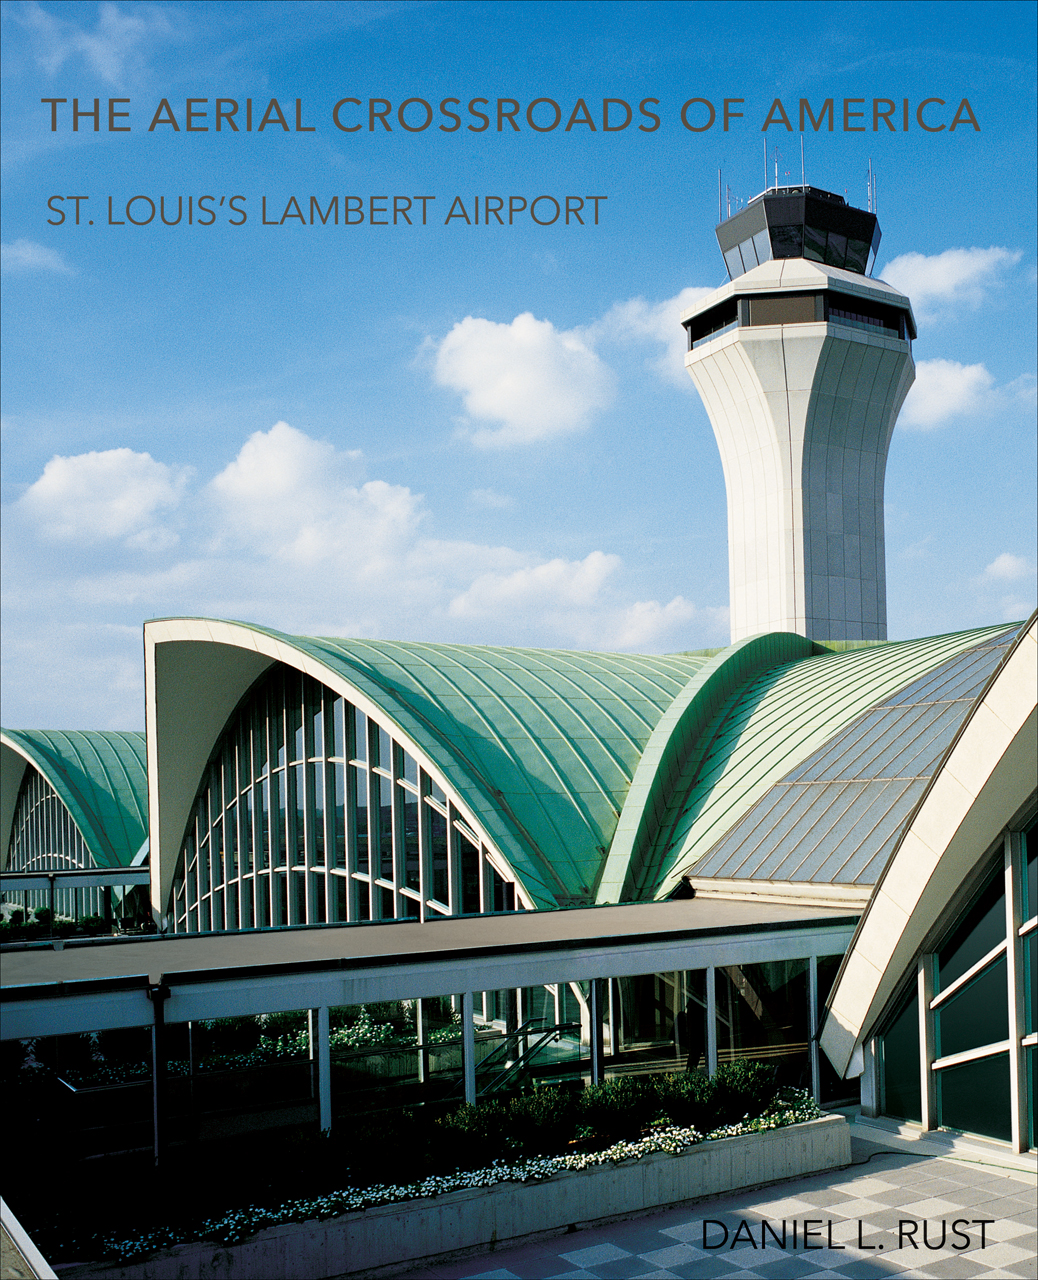 The Aero Experience: New Book Chronicles the History of Lambert-St. Louis International Airport